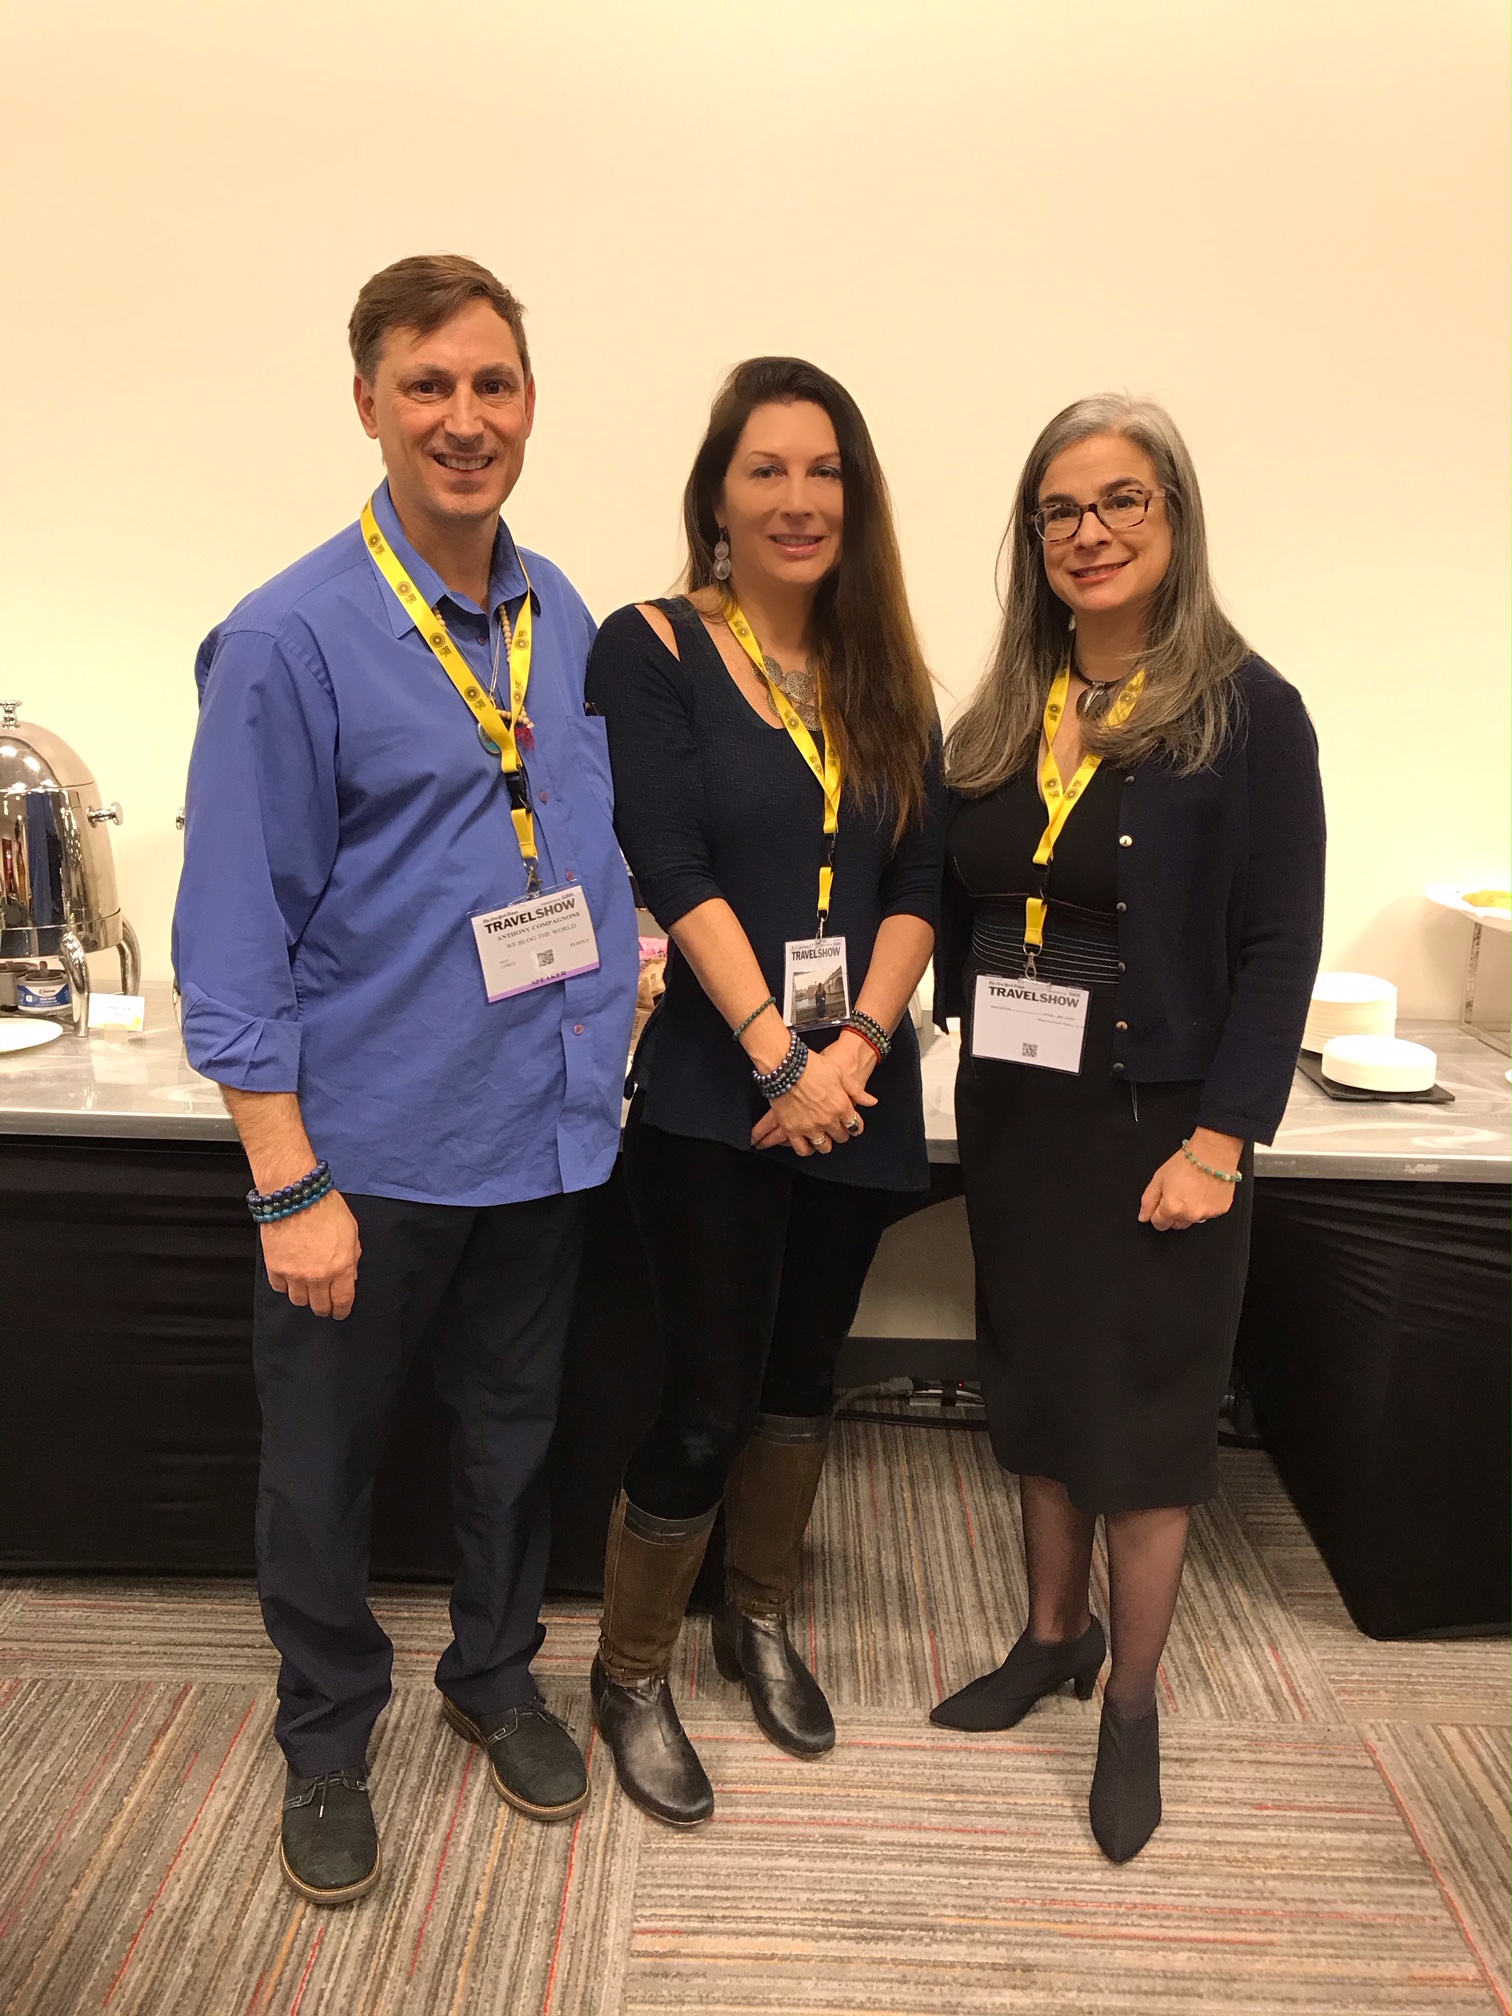 Anthony Compagnone, Renee Blodgett and Pauline Frommer in the New York Times Travel Show Speaker room.